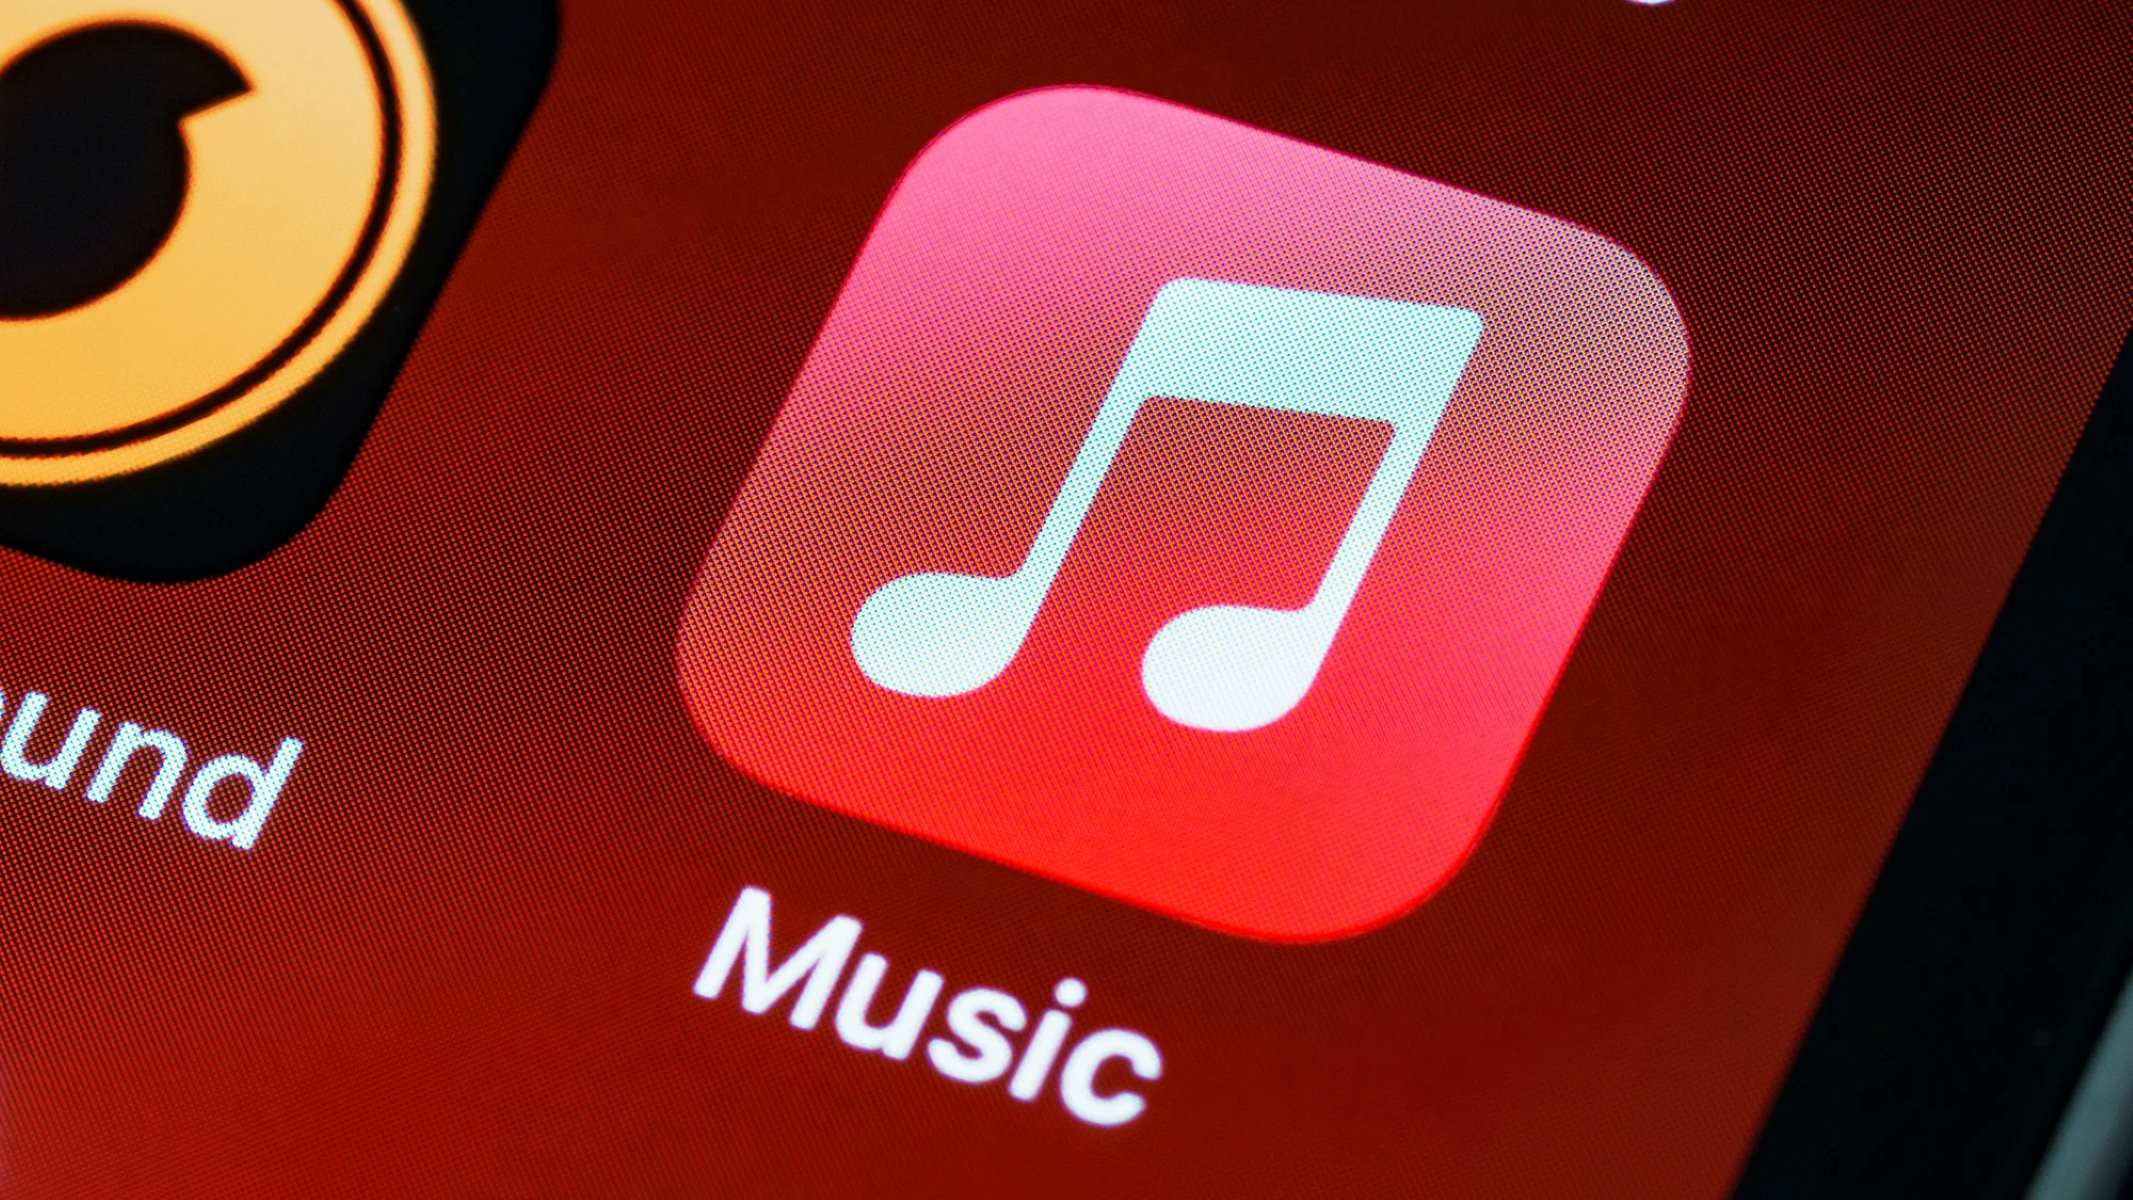 Was It A Good Decision For Apple To Launch Its Own Music Streaming Service? Why Or Why Not?